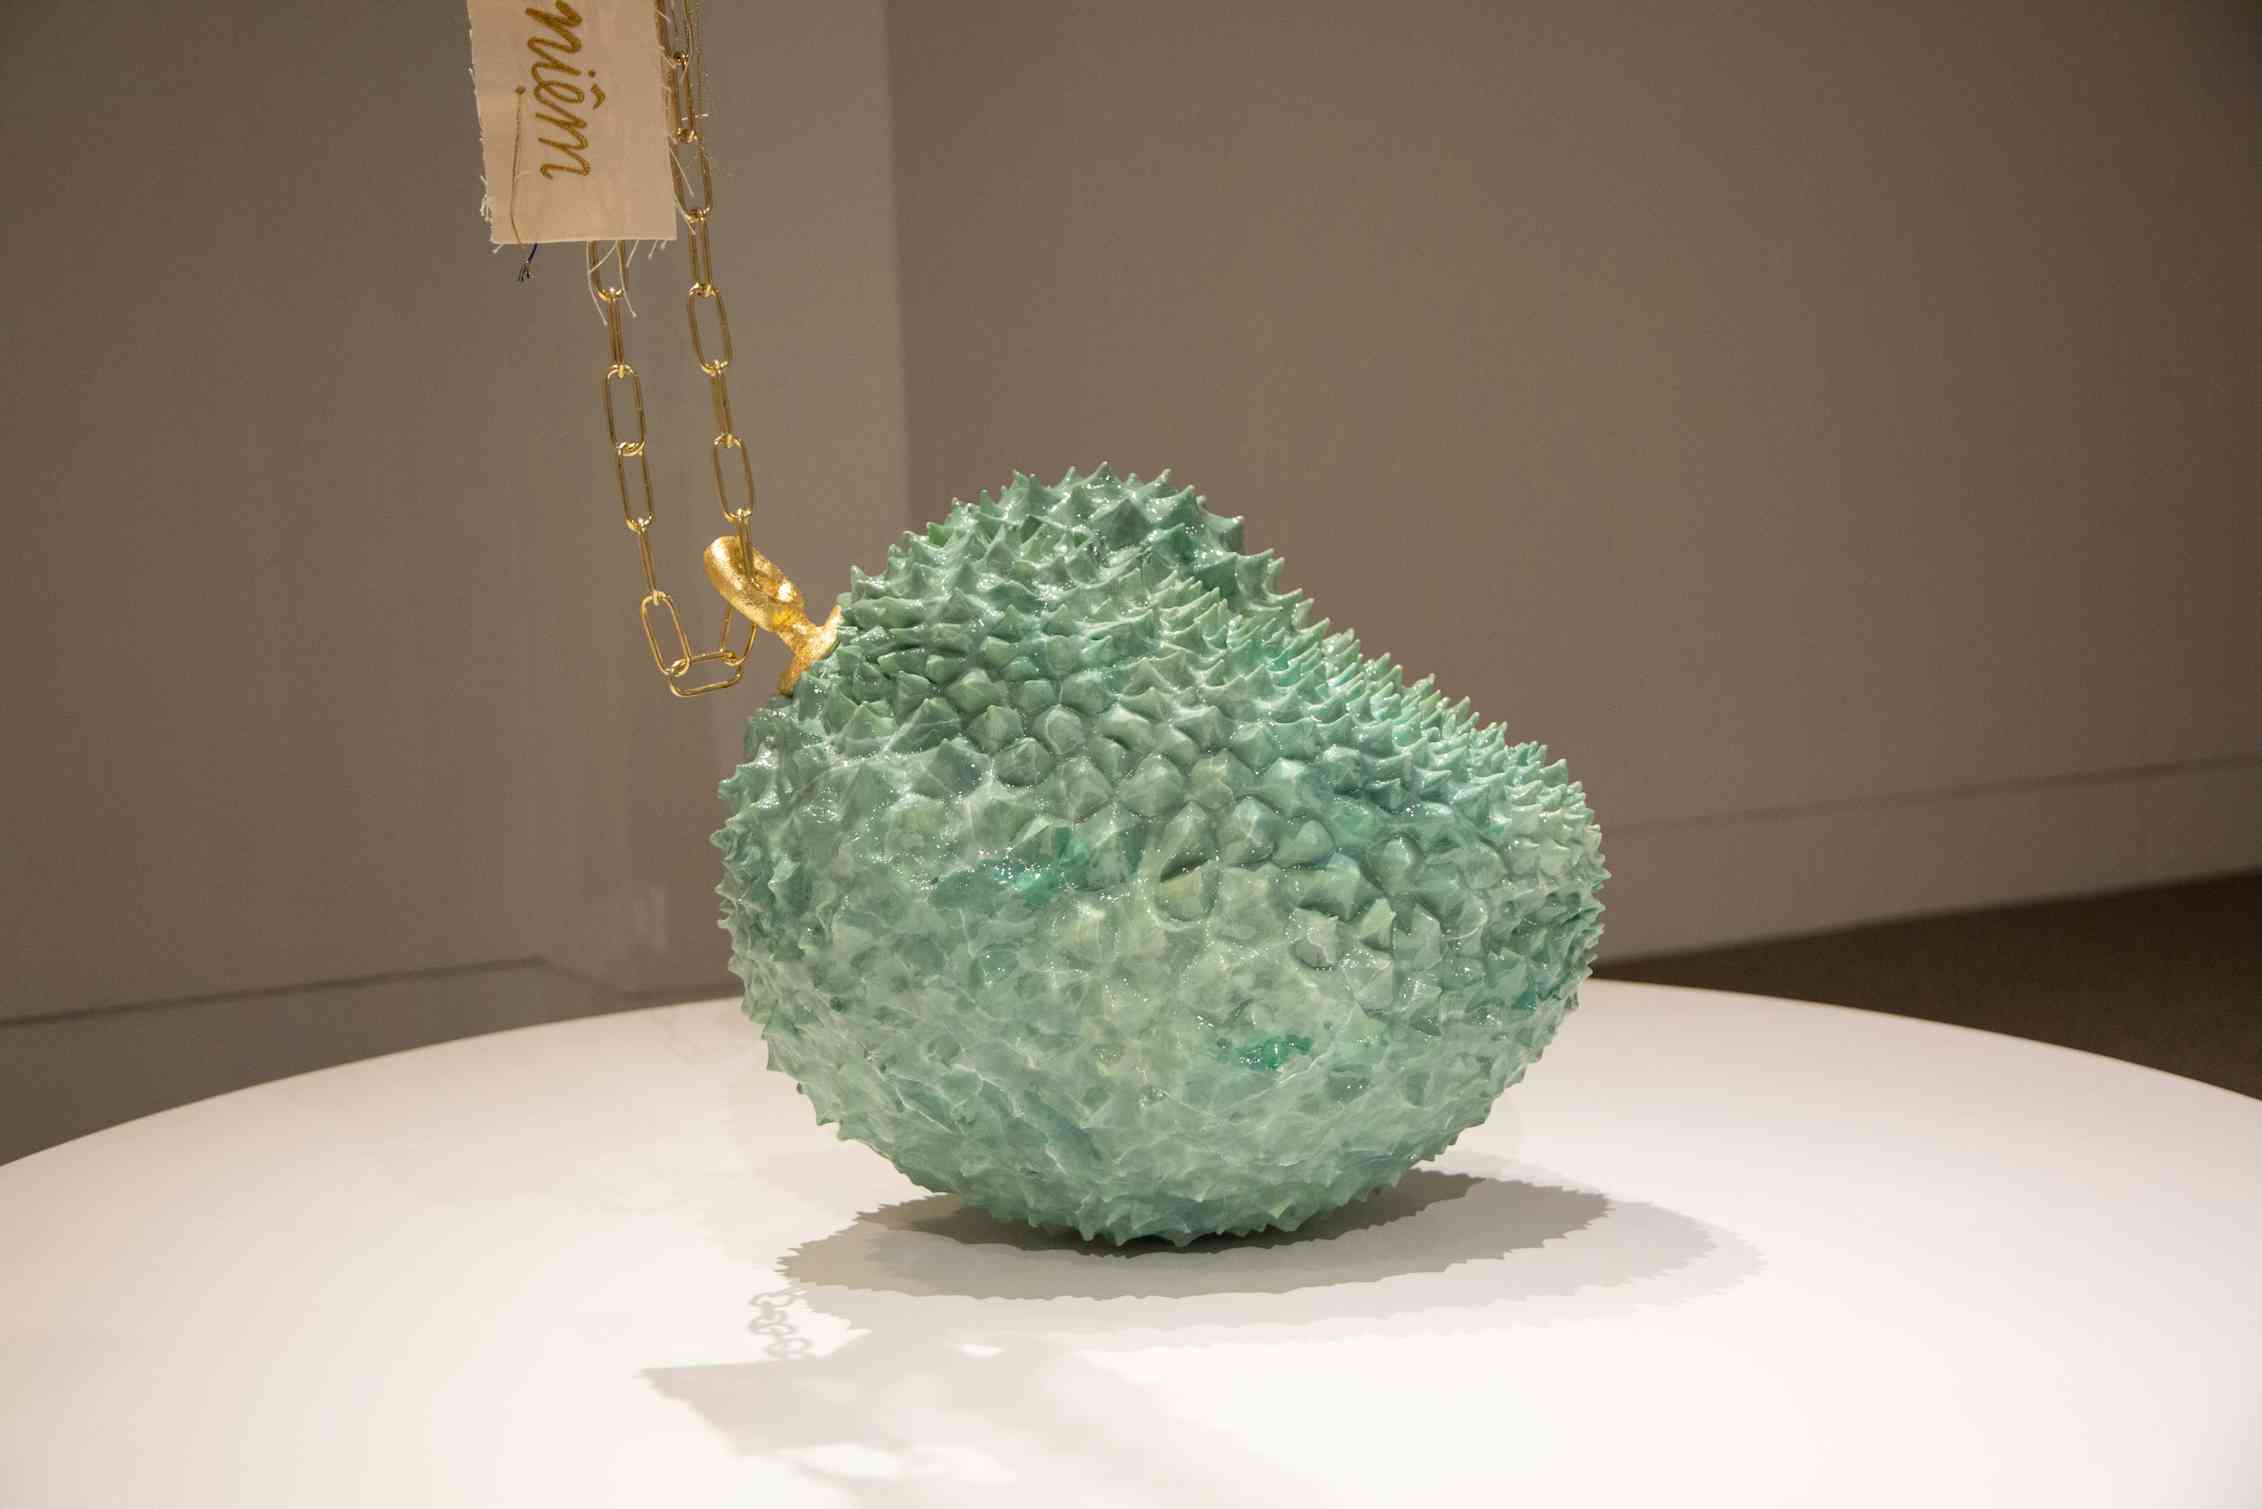 A sculpture of a durian fruit painted green.